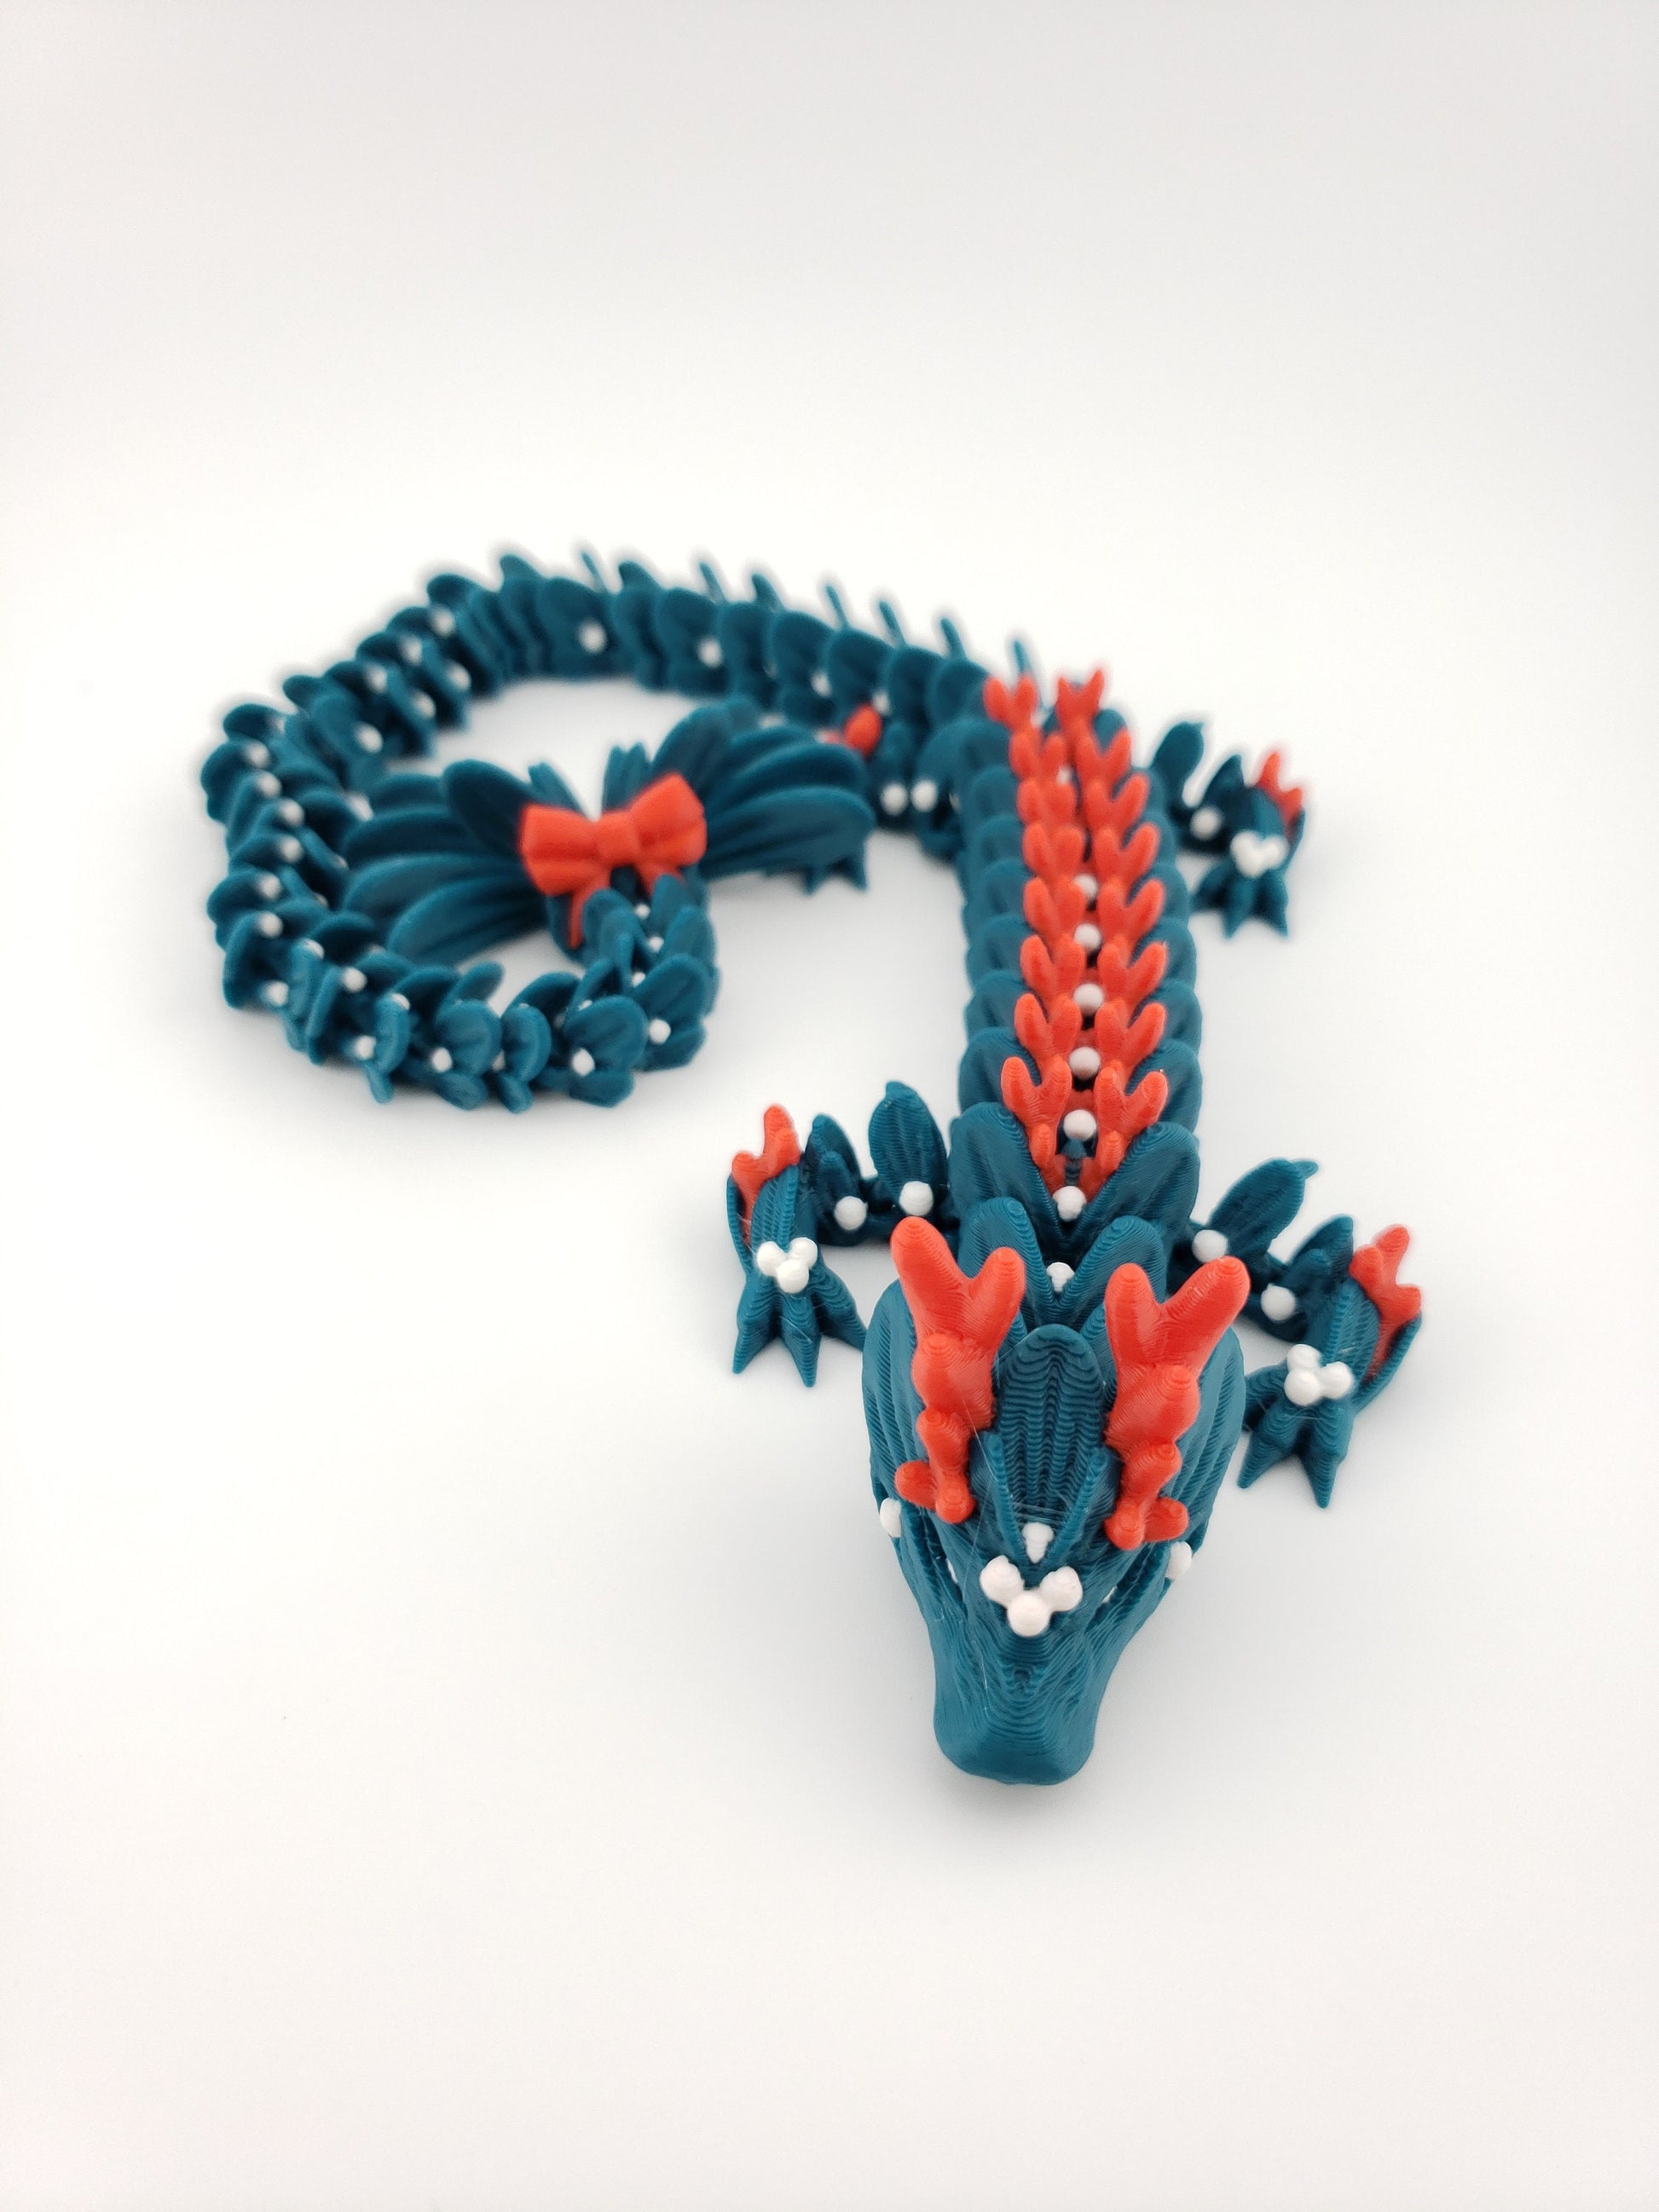 Articulated Mistle Toe Christmas Winter Dragon - 3D Printed Fidget Fantasy Creature - Customizable Colors - Cinderwing3d- 12 Inch